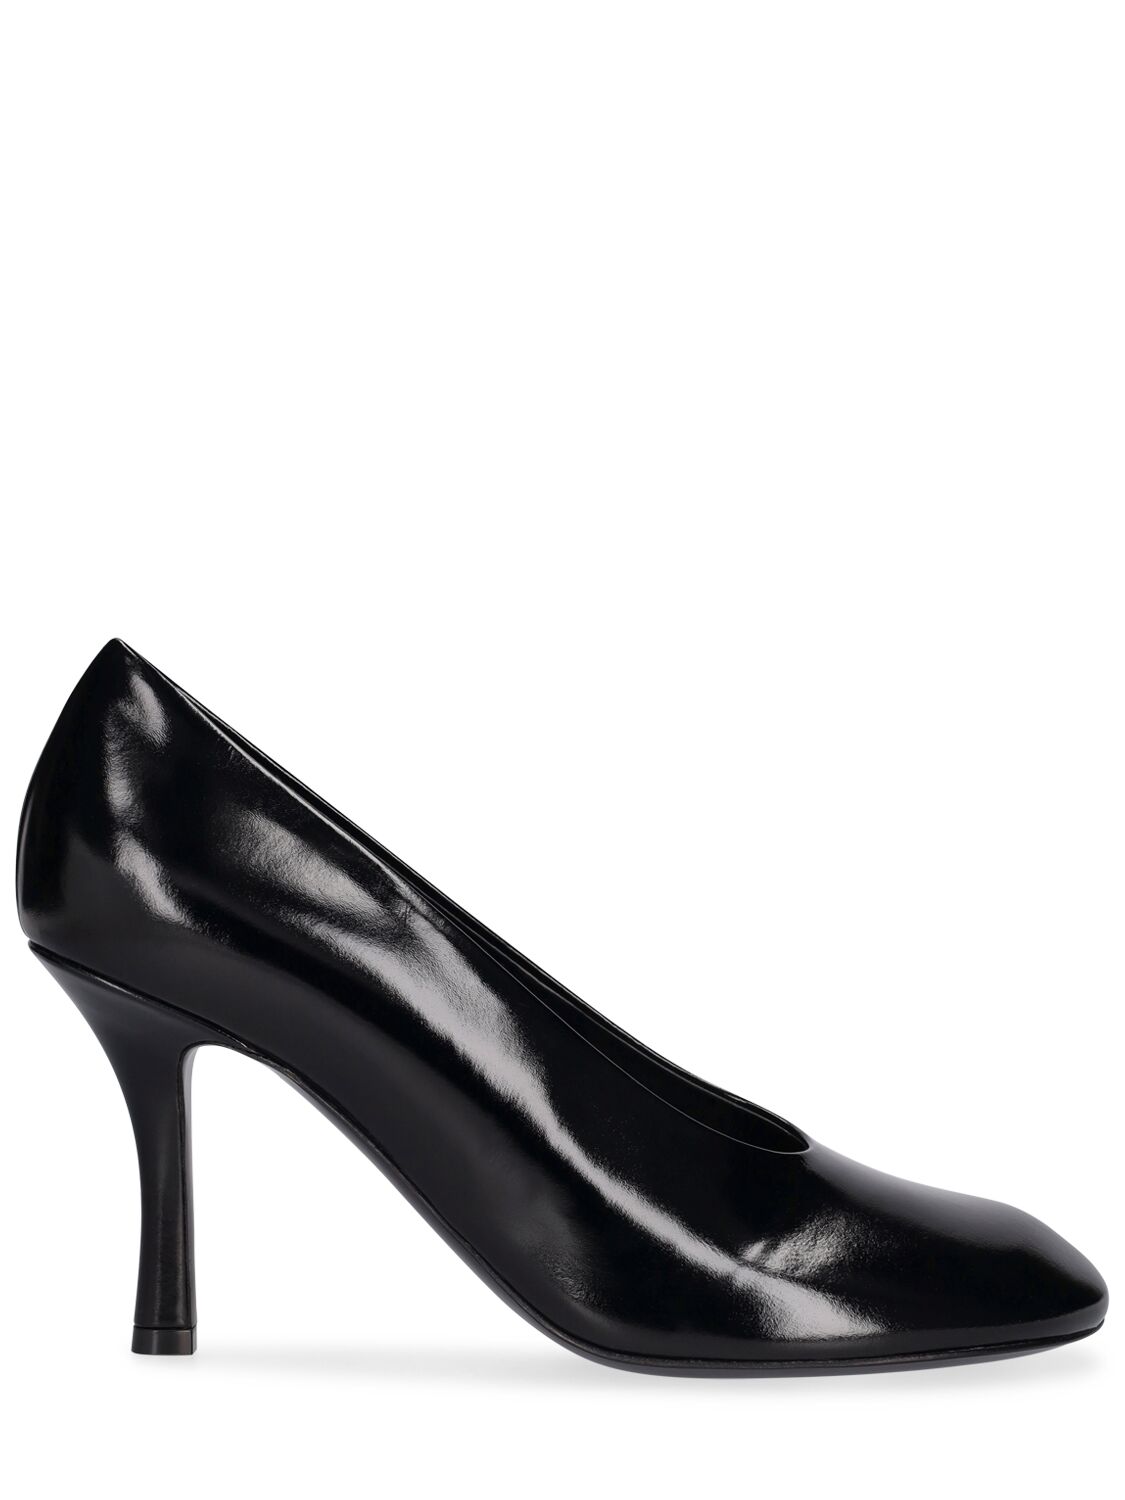 Image of 105mm Lf Ws0 Leather Pumps